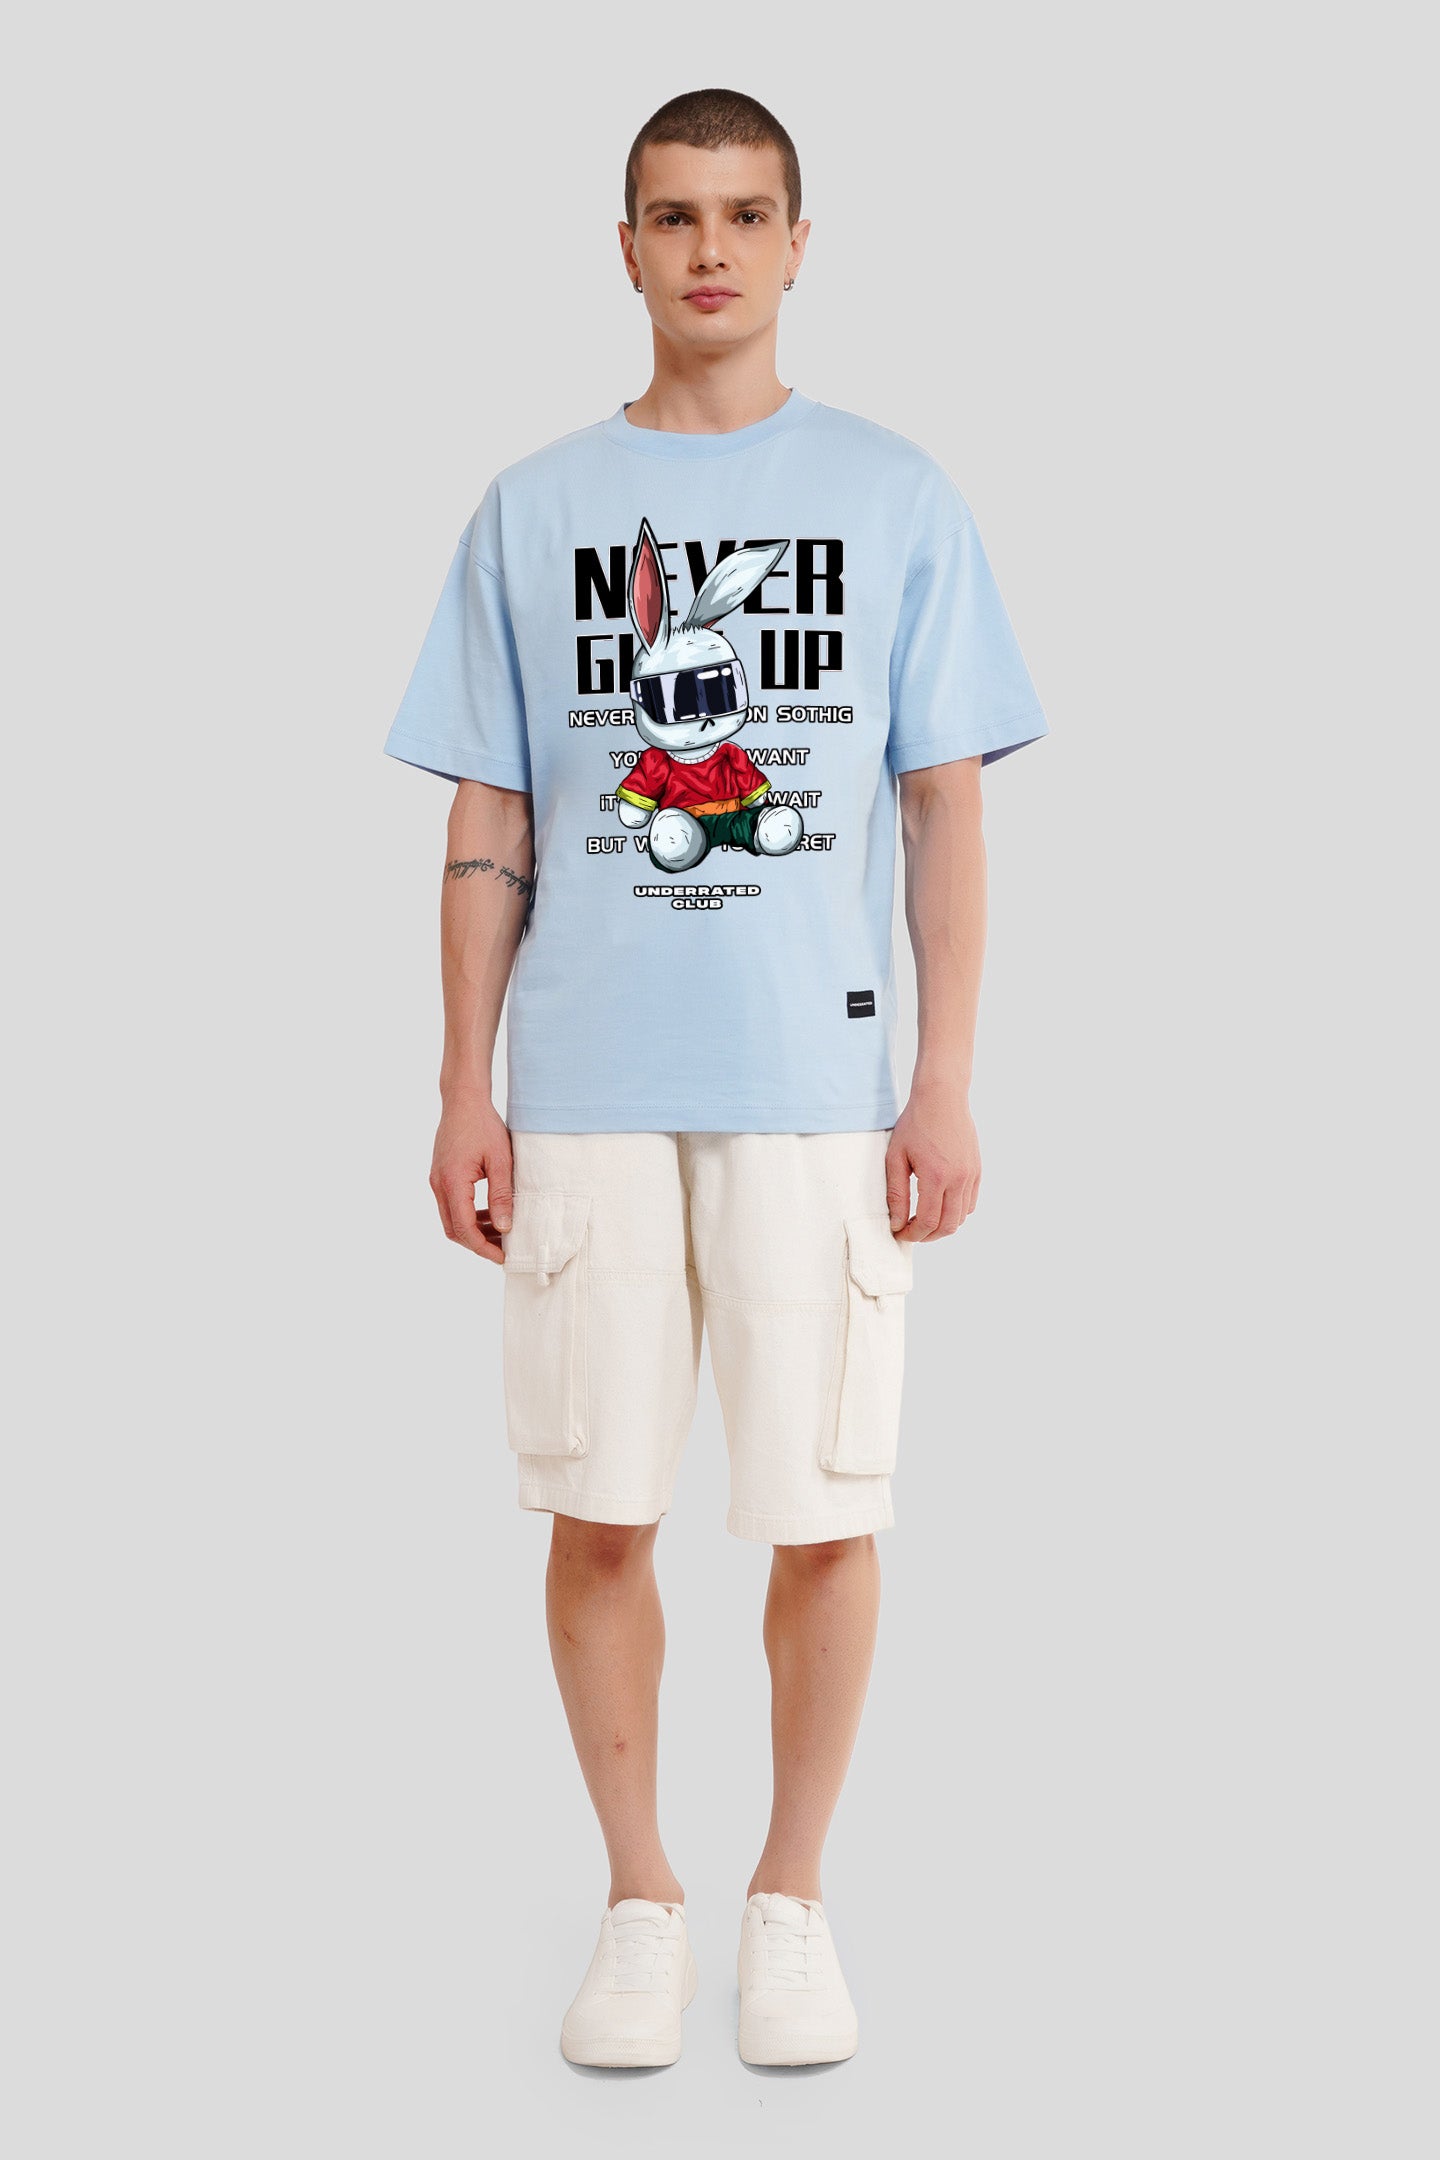 Never Give Up Powder Blue Printed T Shirt Men Oversized Fit With Front Design Pic 1